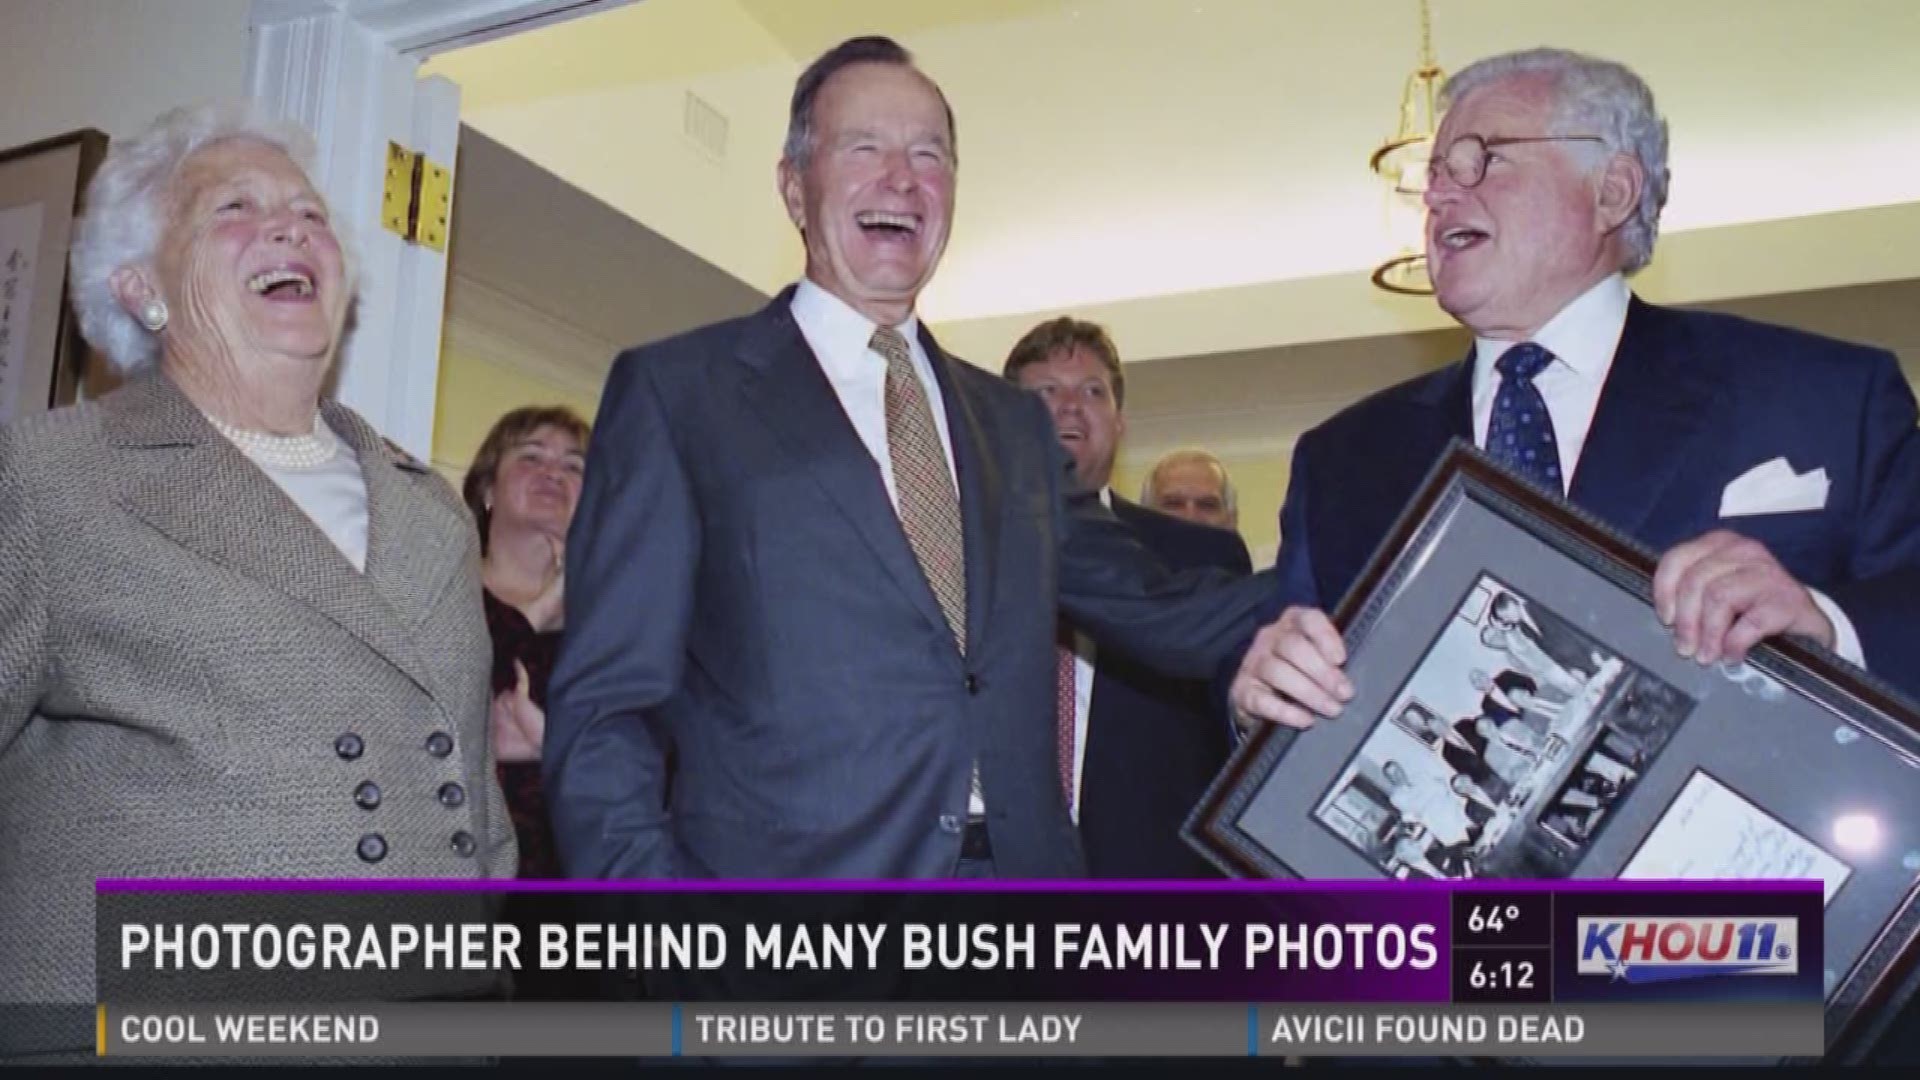 For more than twenty years, Chandler Arden has been volunteering his time to capture important events at the George Bush Presidential Library. And that's given him a front row seat to the life of the iconic couple. From the ceremonies to the celebrities, 